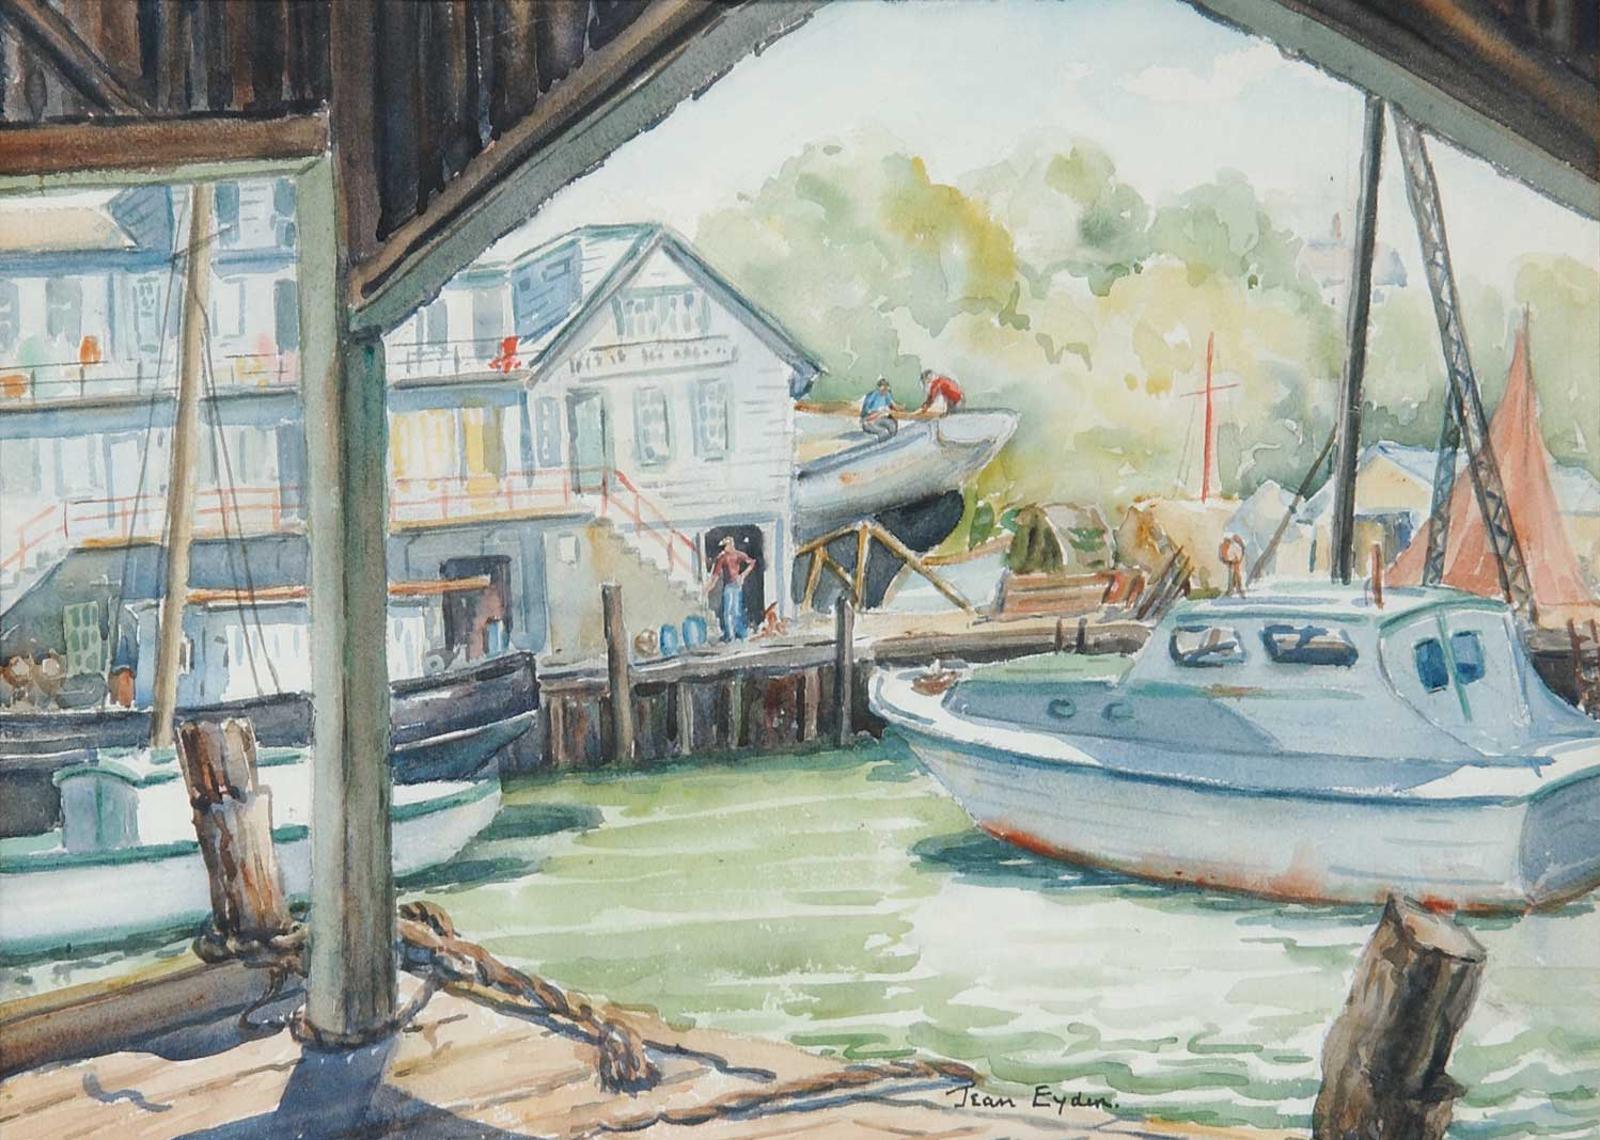 Jean Eyden - Untitled - Boats at the Pier